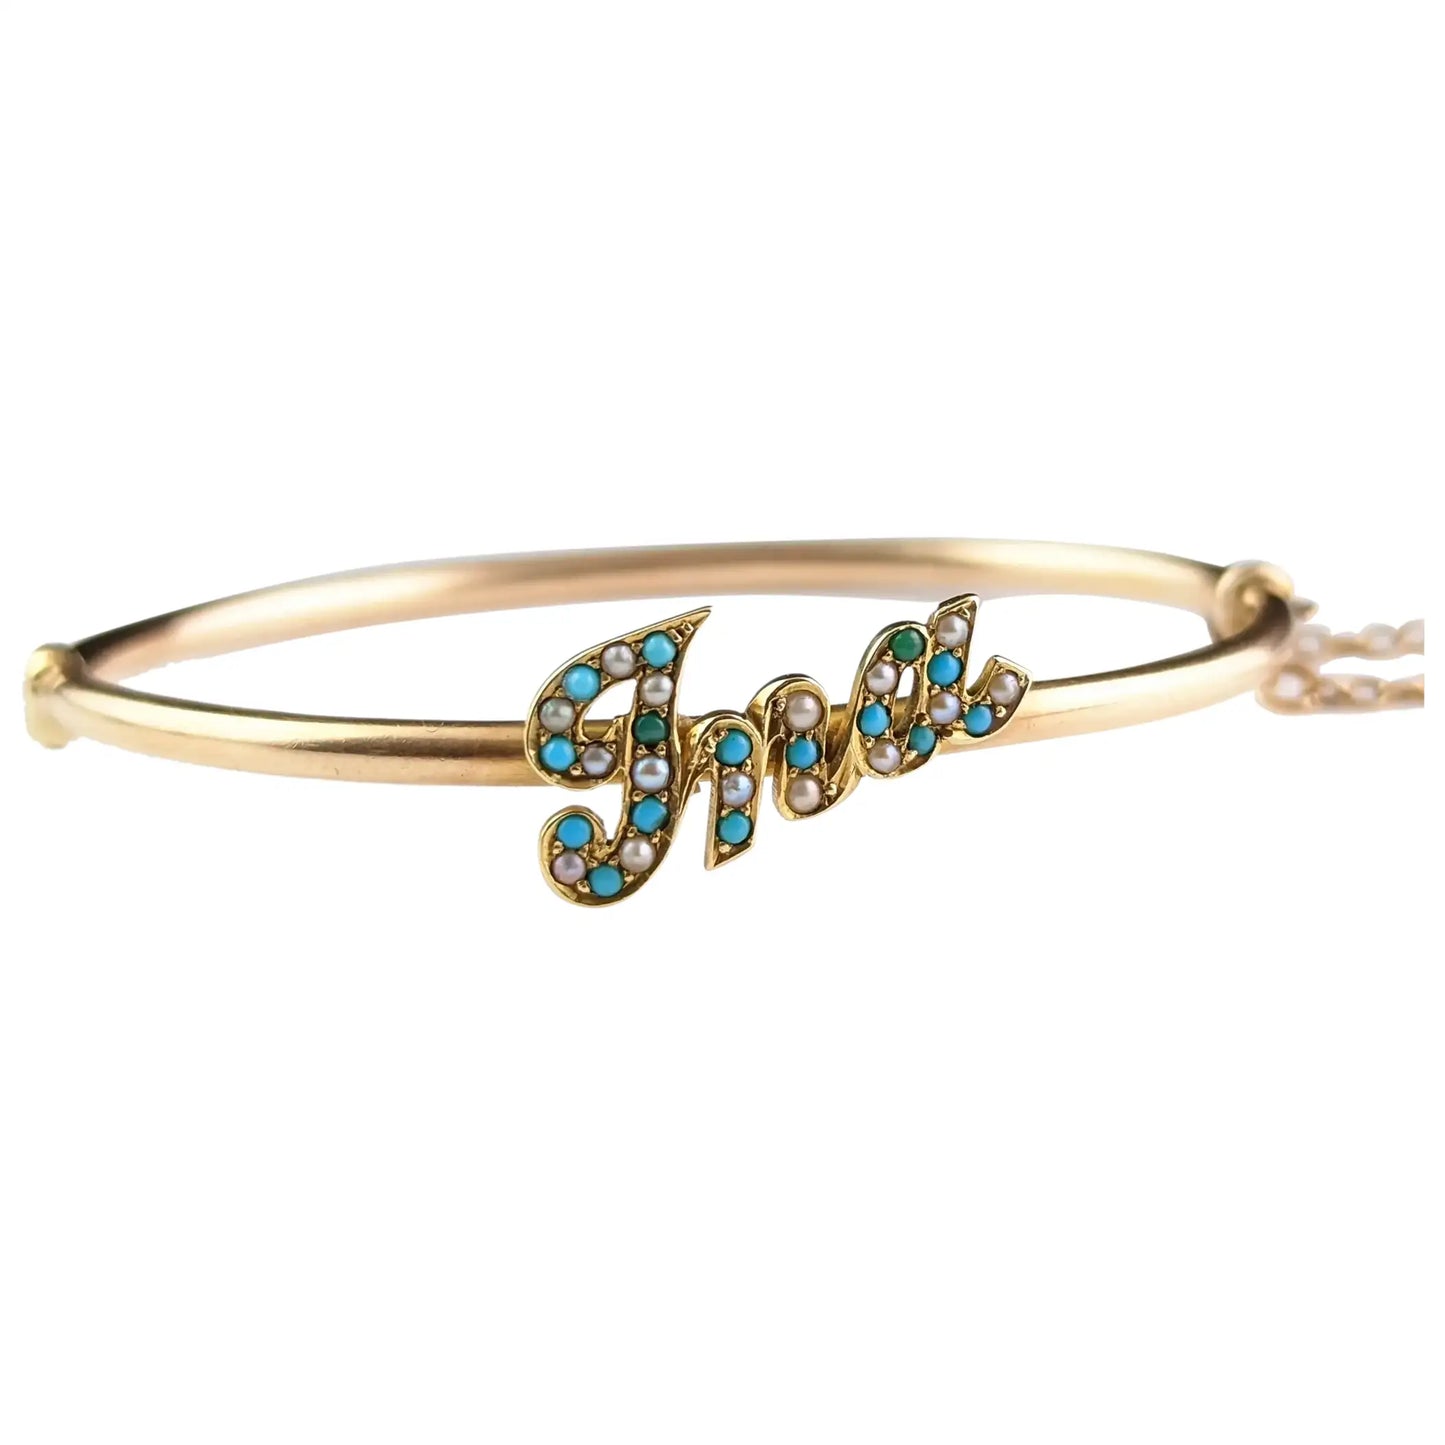 Antique 15ct gold name bangle, Ina, Turquoise and Pearl